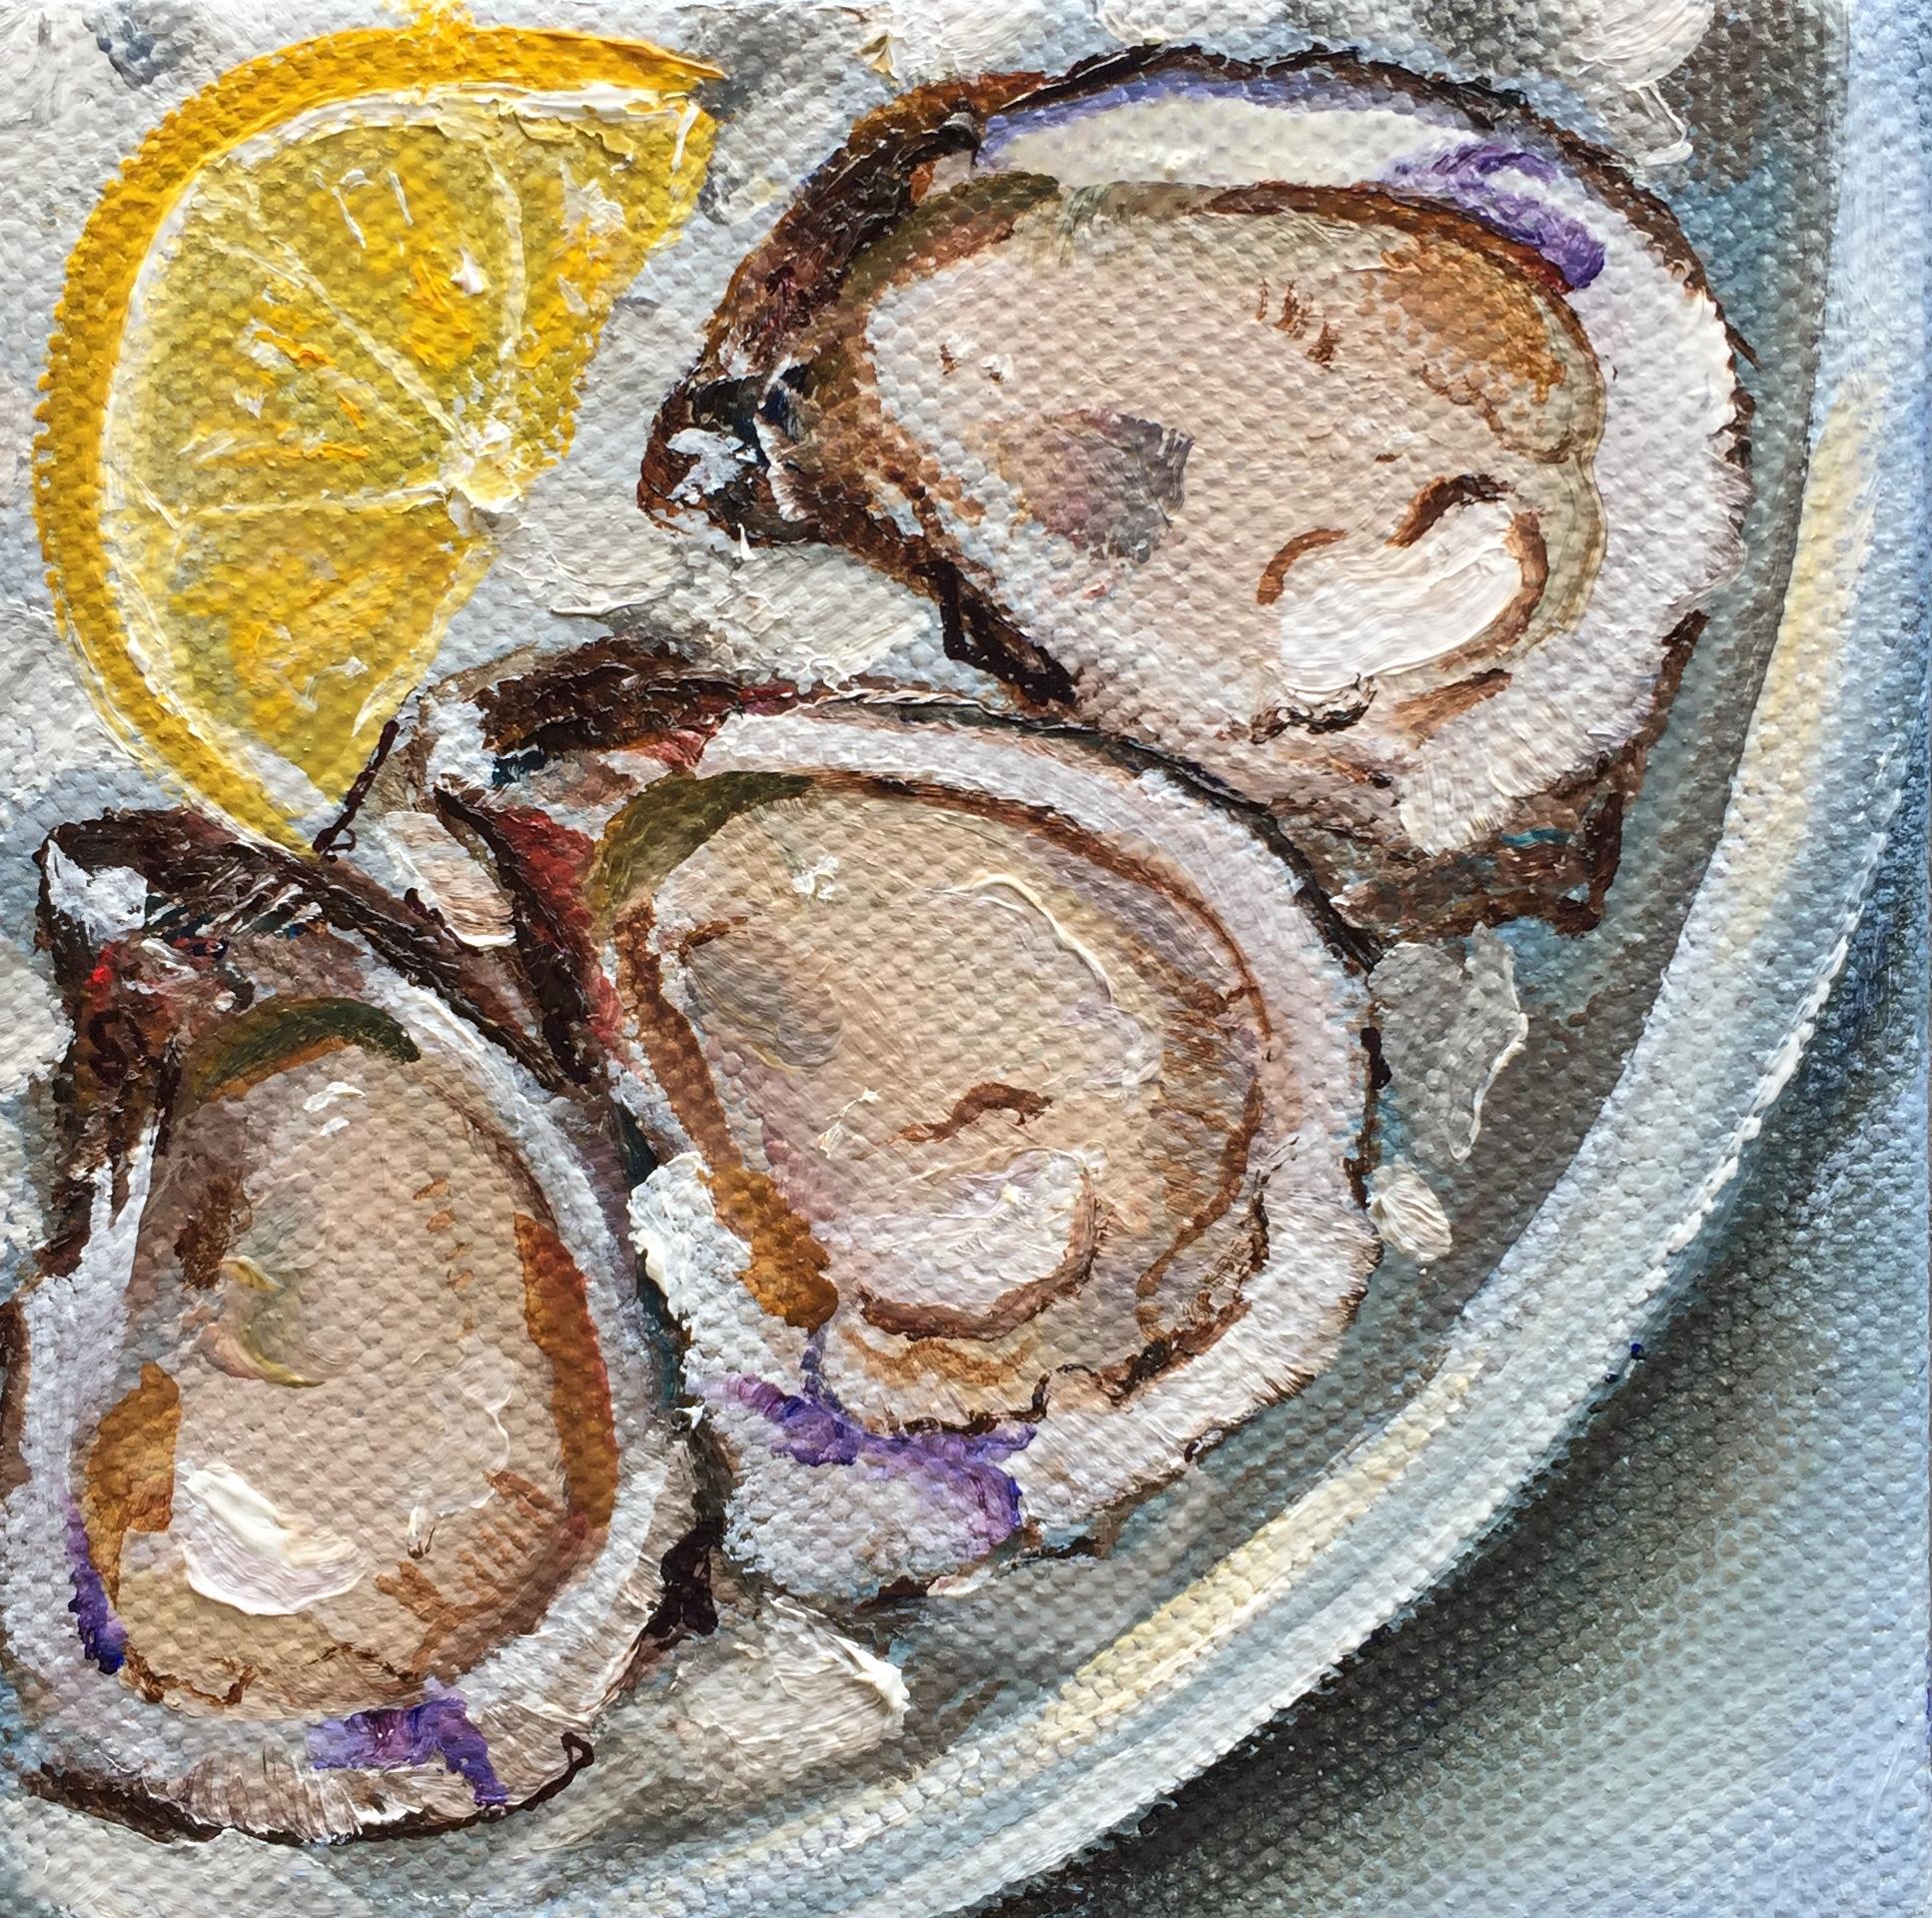 Oysters with Lemon - Art by Kristine Kainer